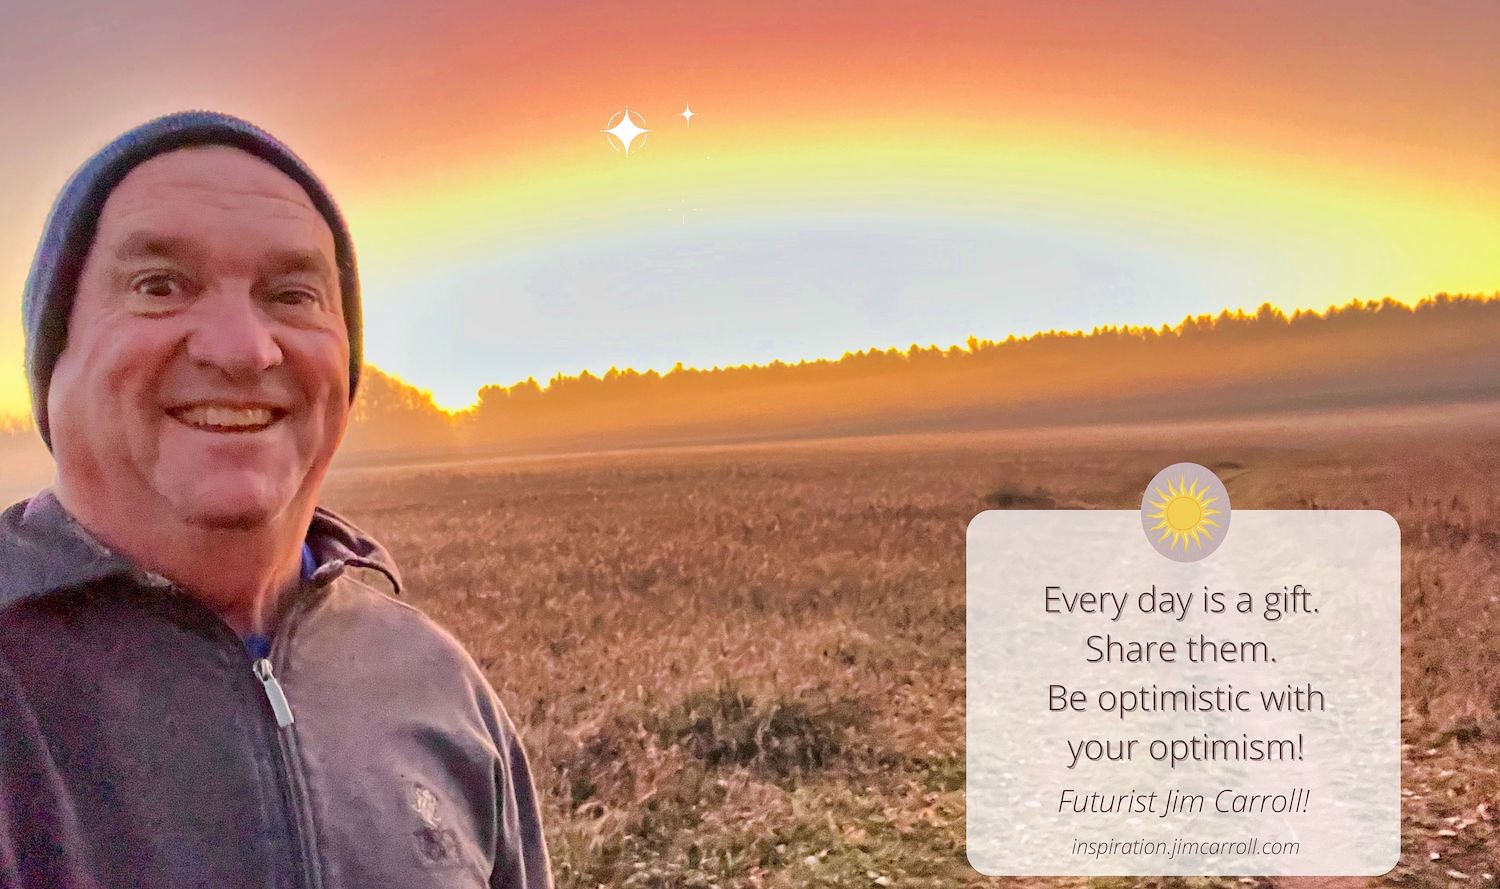 "Every day is a gift. Share them. Be optimistic with your optimism!" - Futurist Jim Carroll